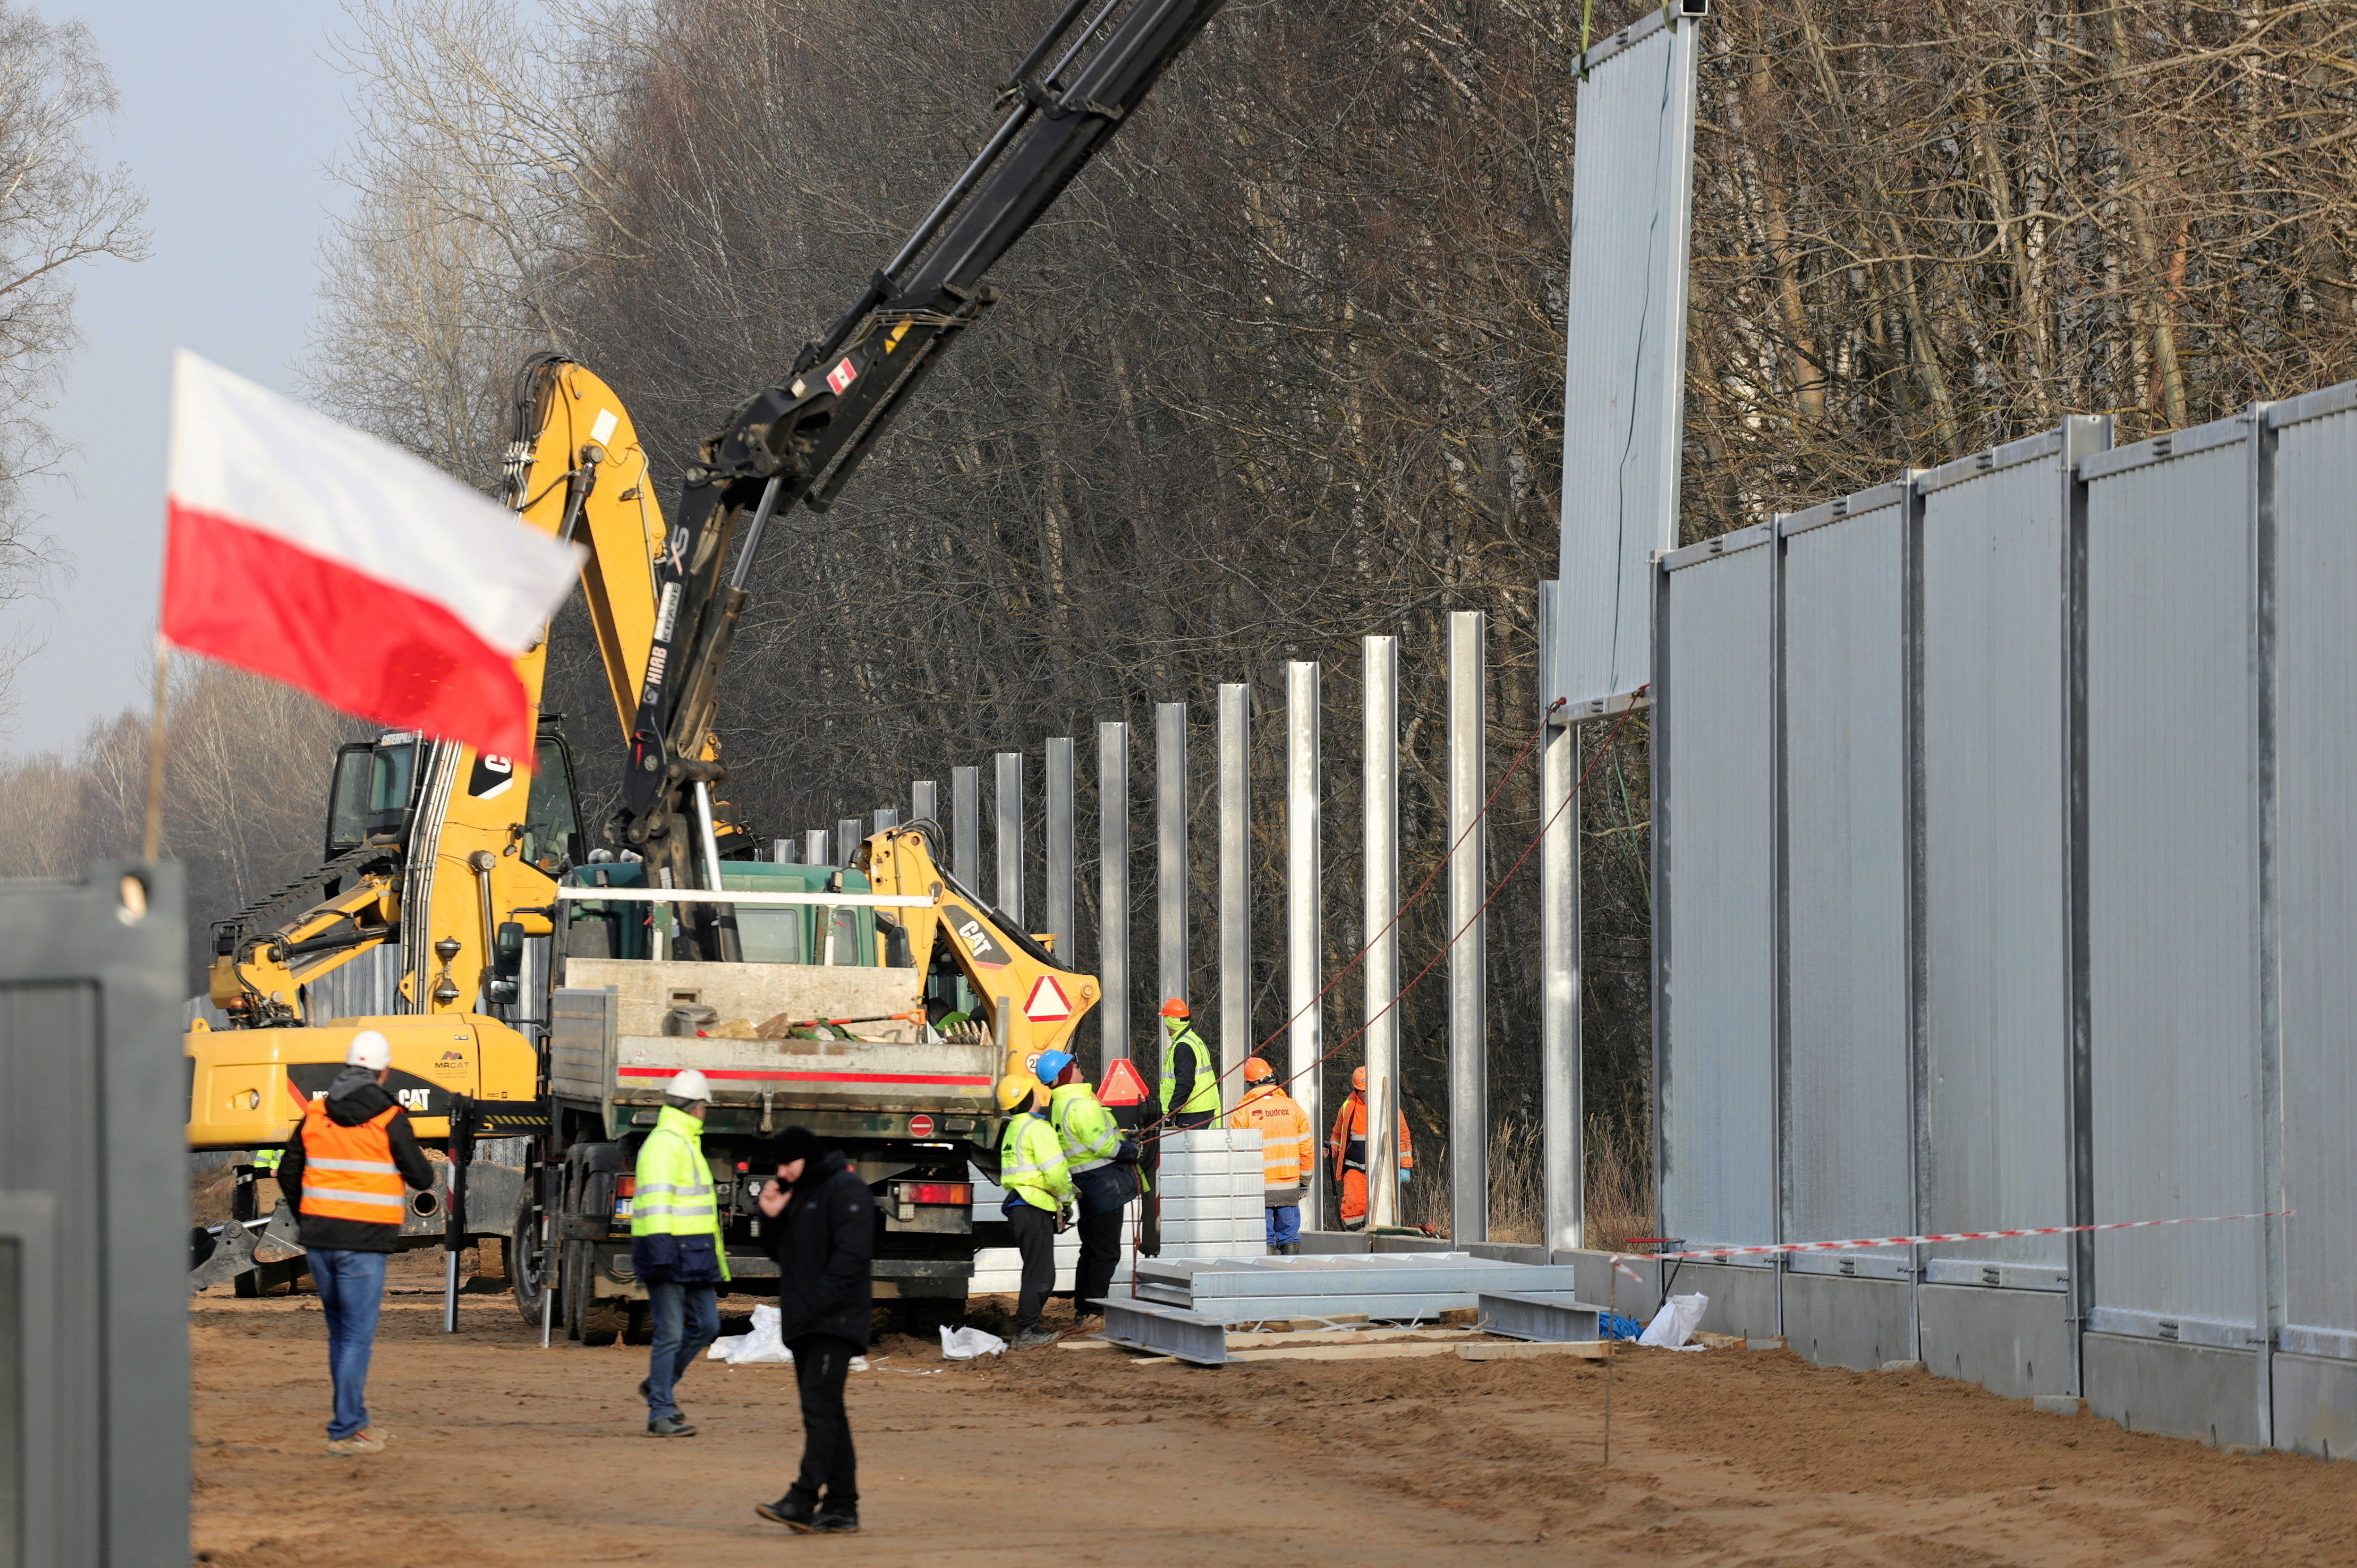 Poland Heightens Border Security Amid Concerns Over Russian Wagner Group In Belarus